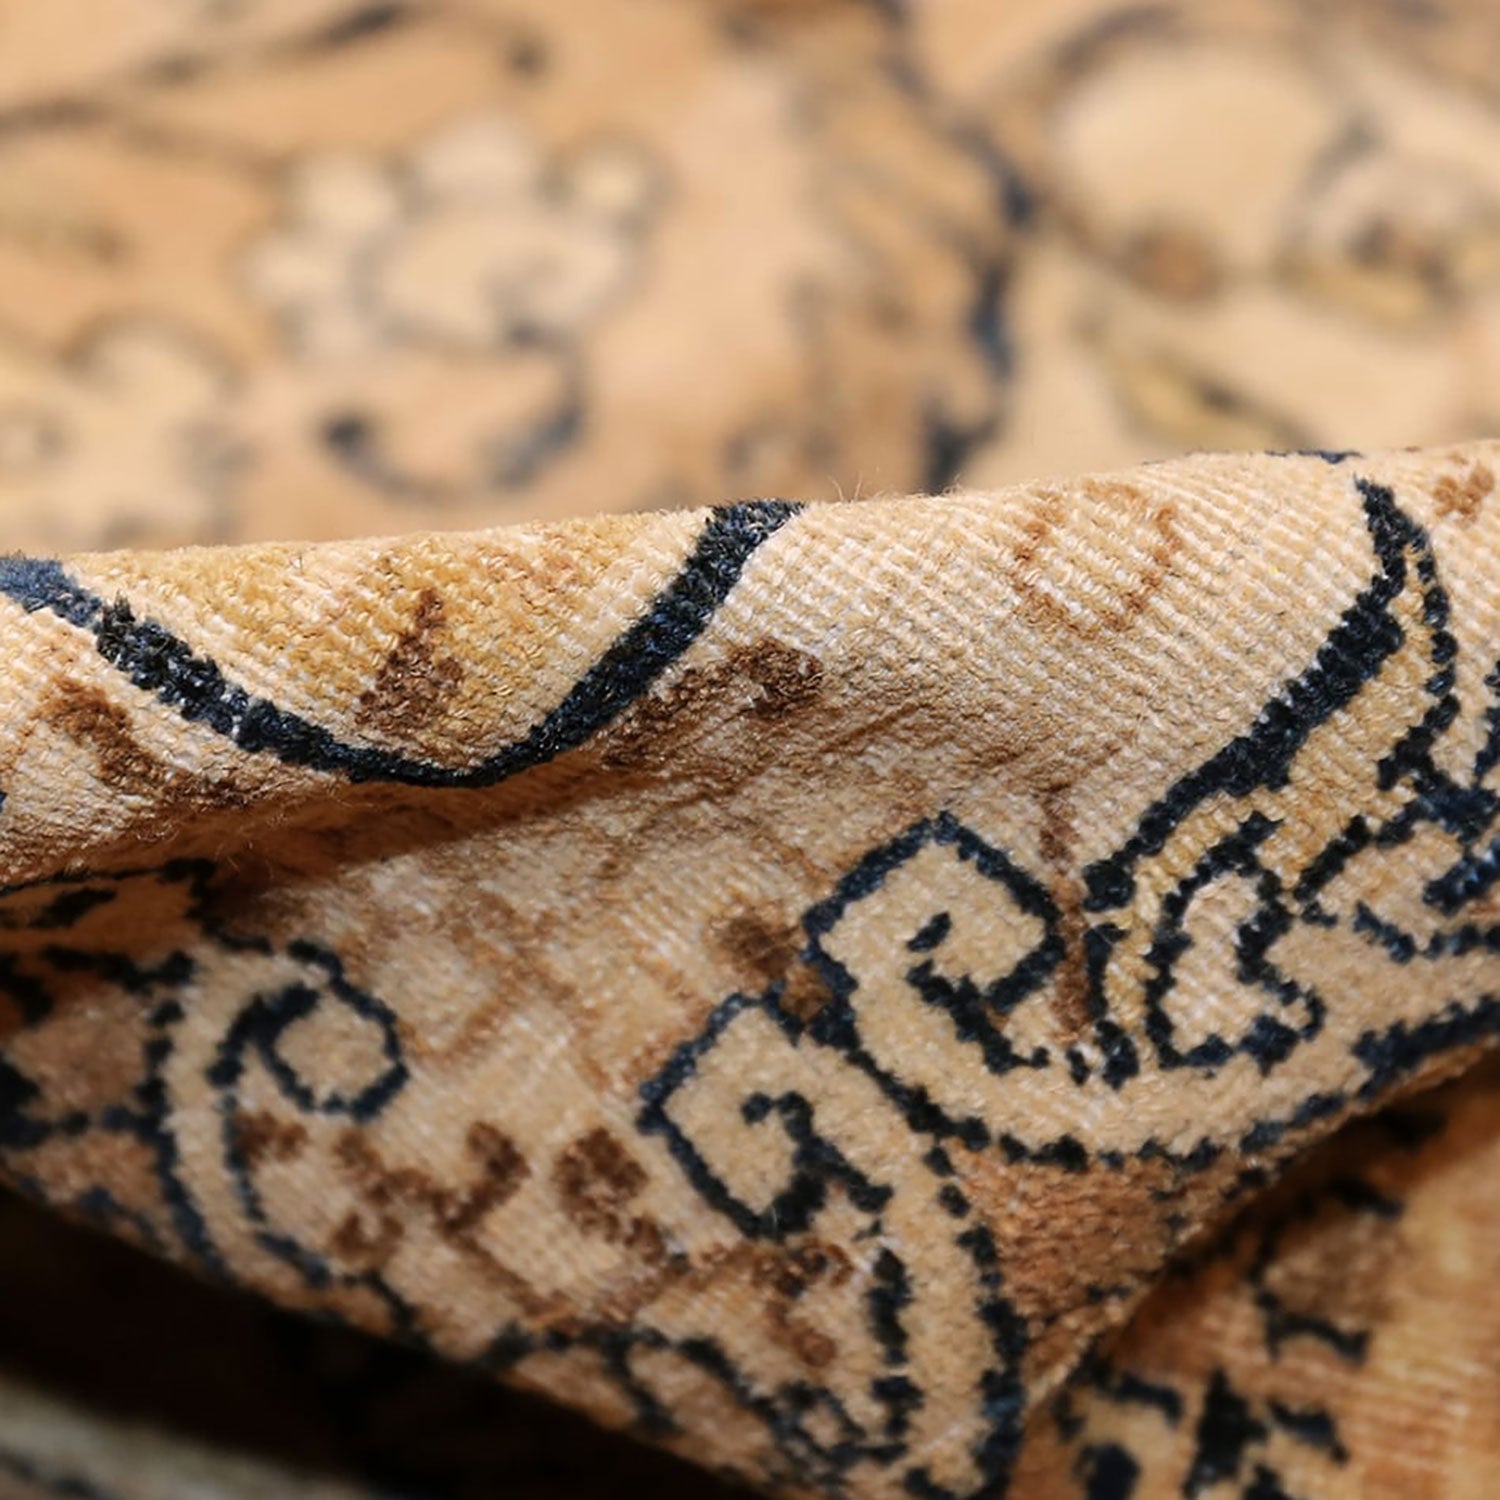 Close-up of a woven fabric with intricate navy blue designs.